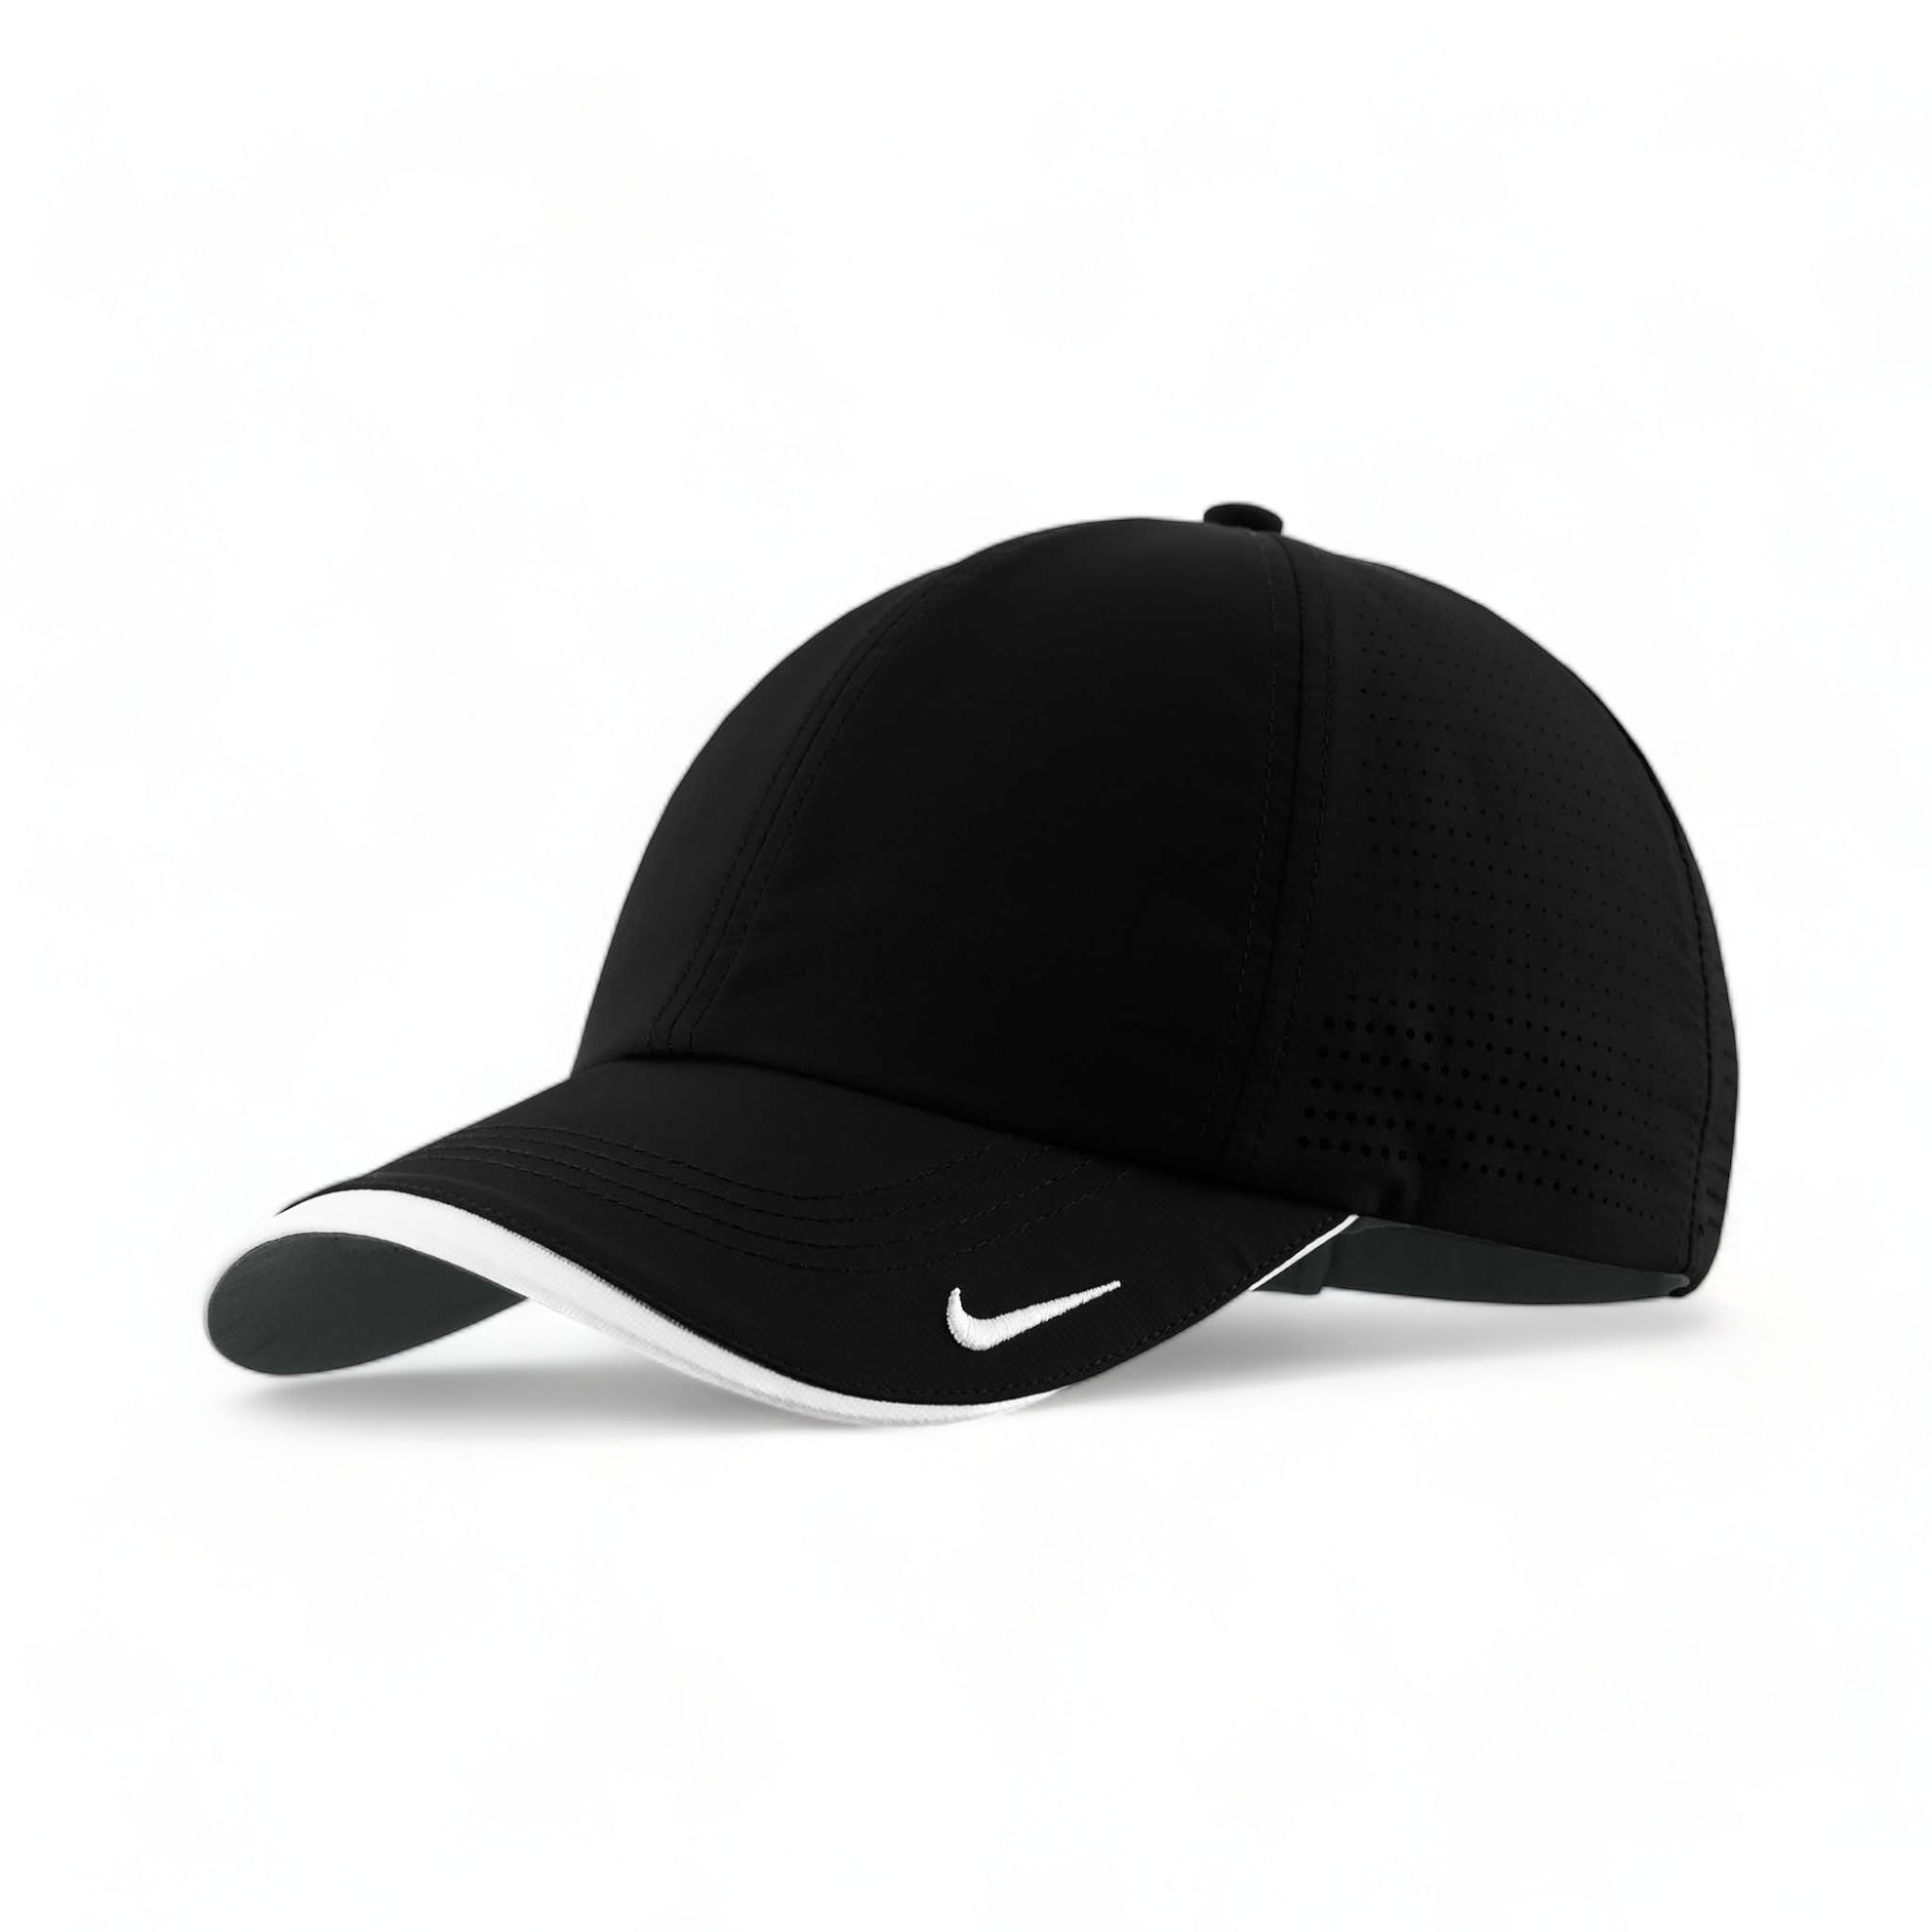 Side view of Nike NKFB6445 custom hat in black and white